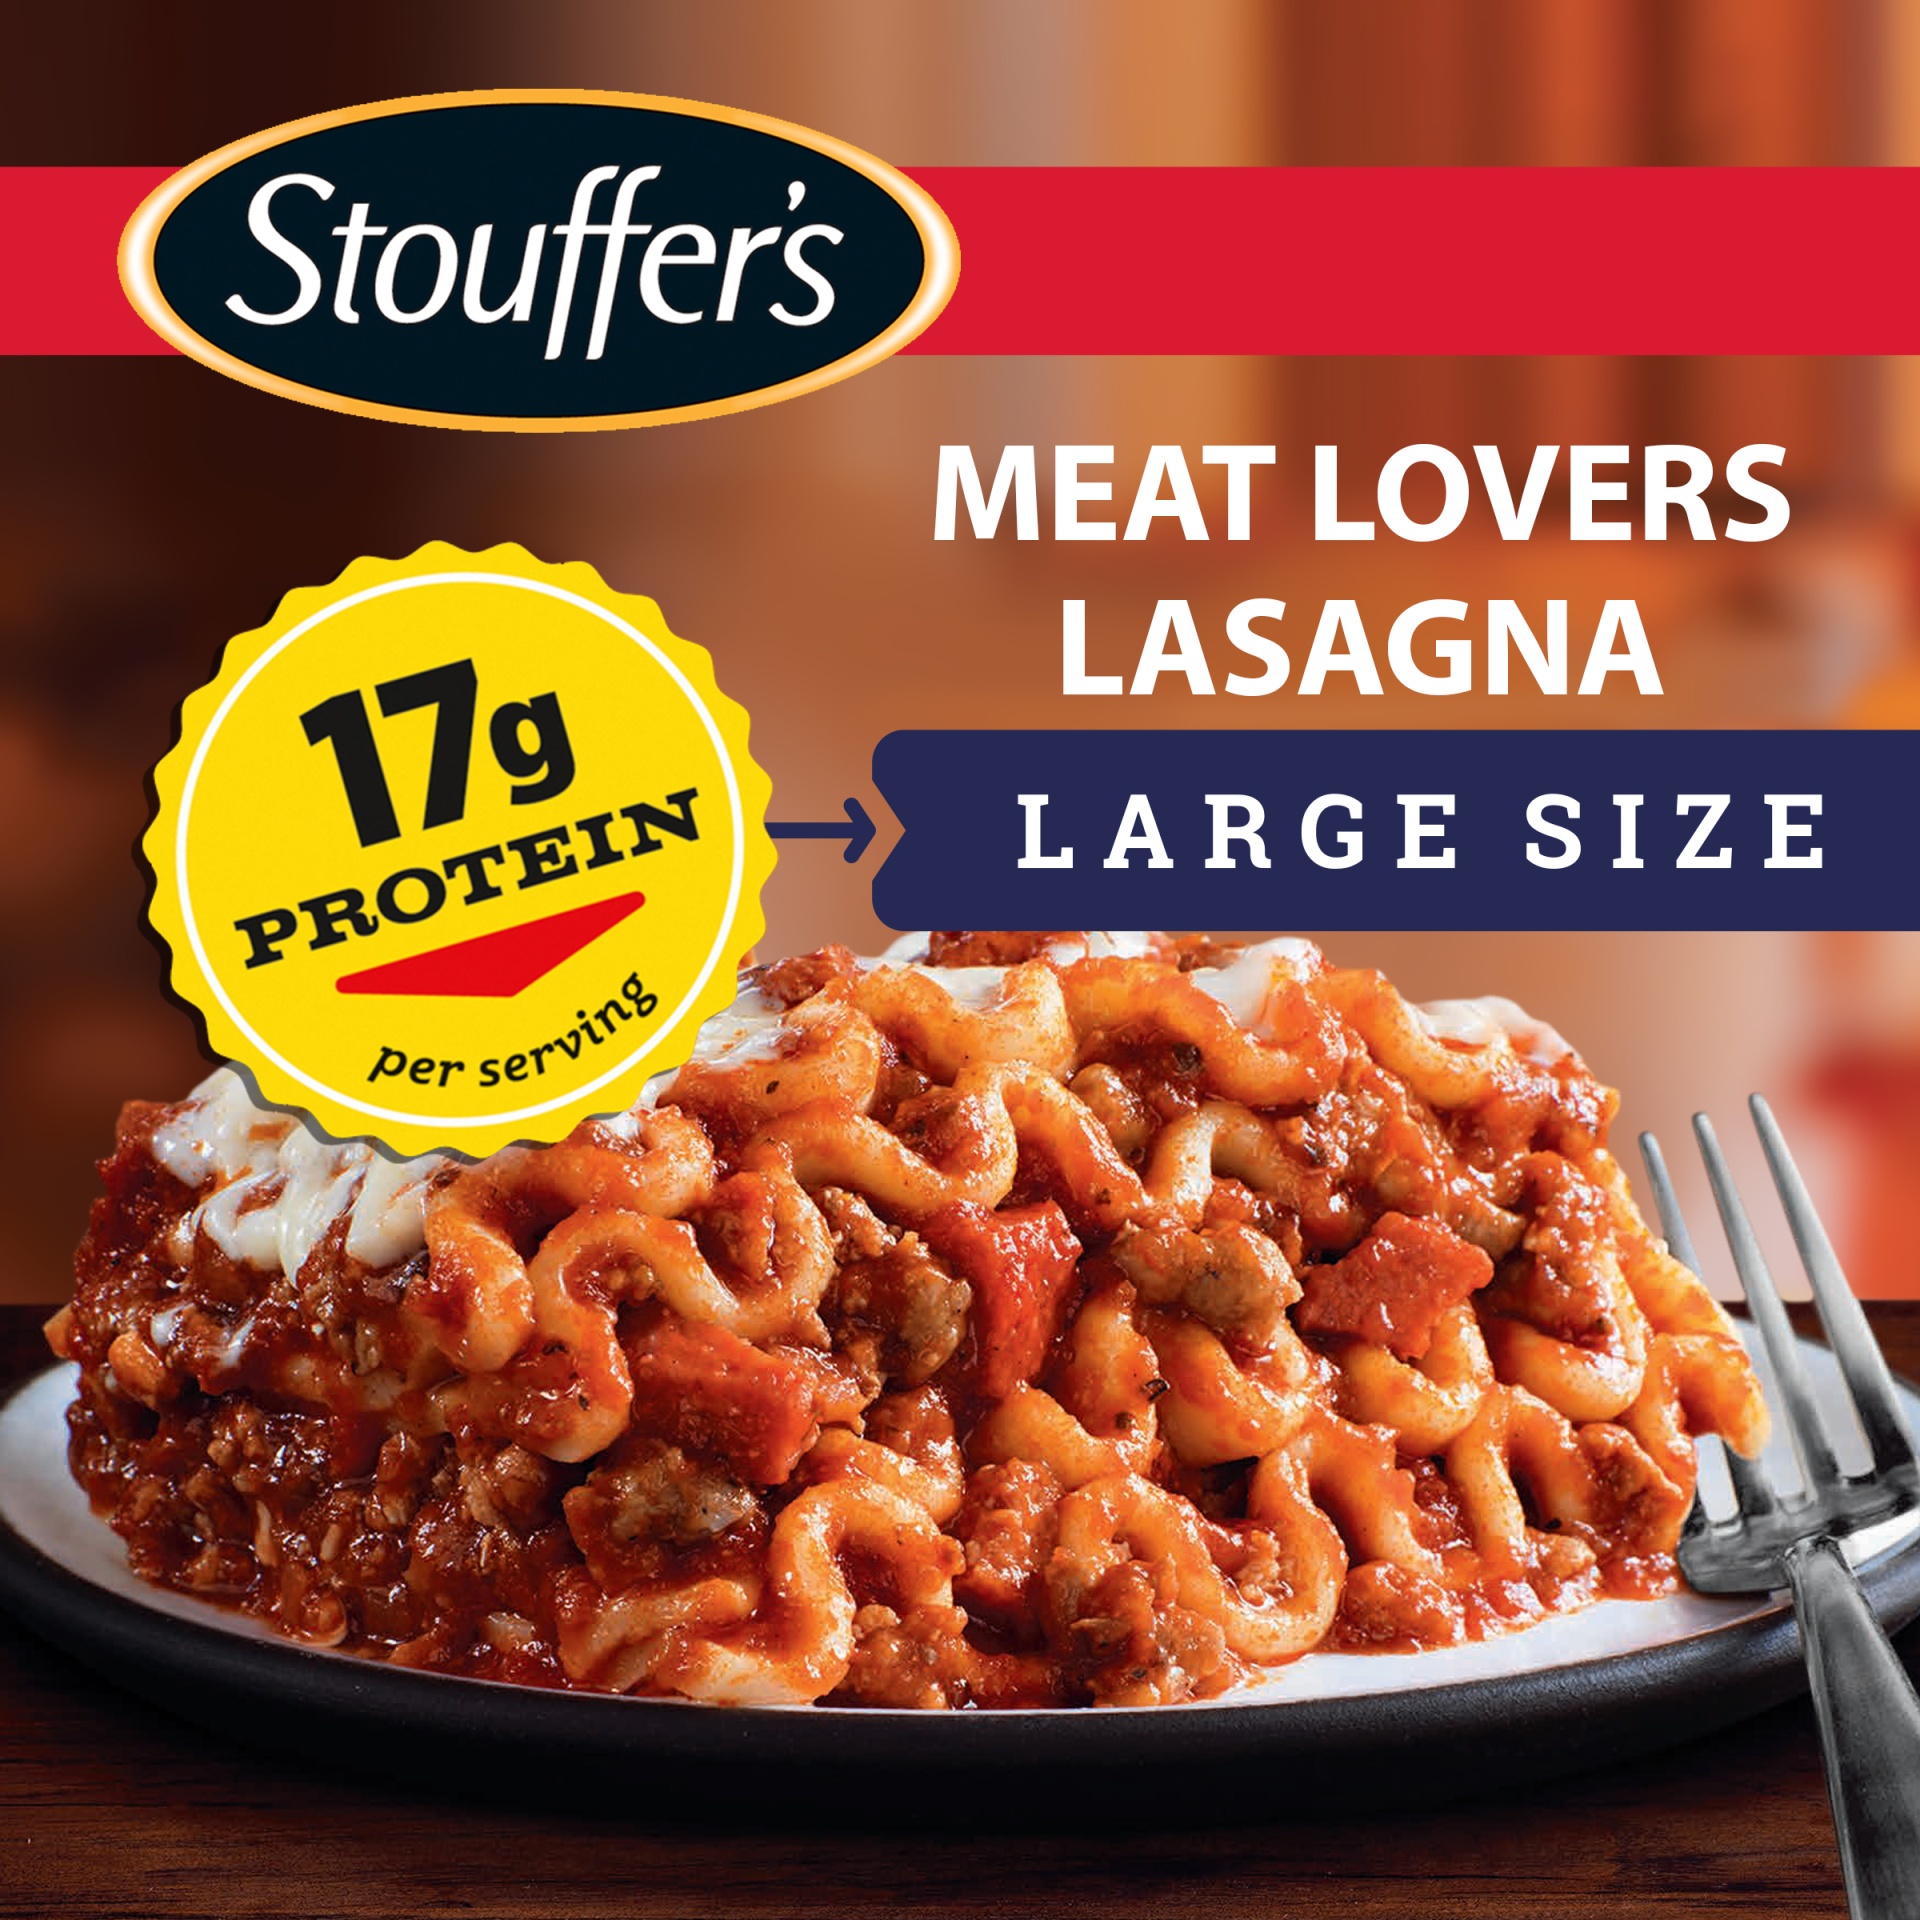 slide 8 of 13, Stouffer's Large Size Meat Lovers Lasagna, 18 oz